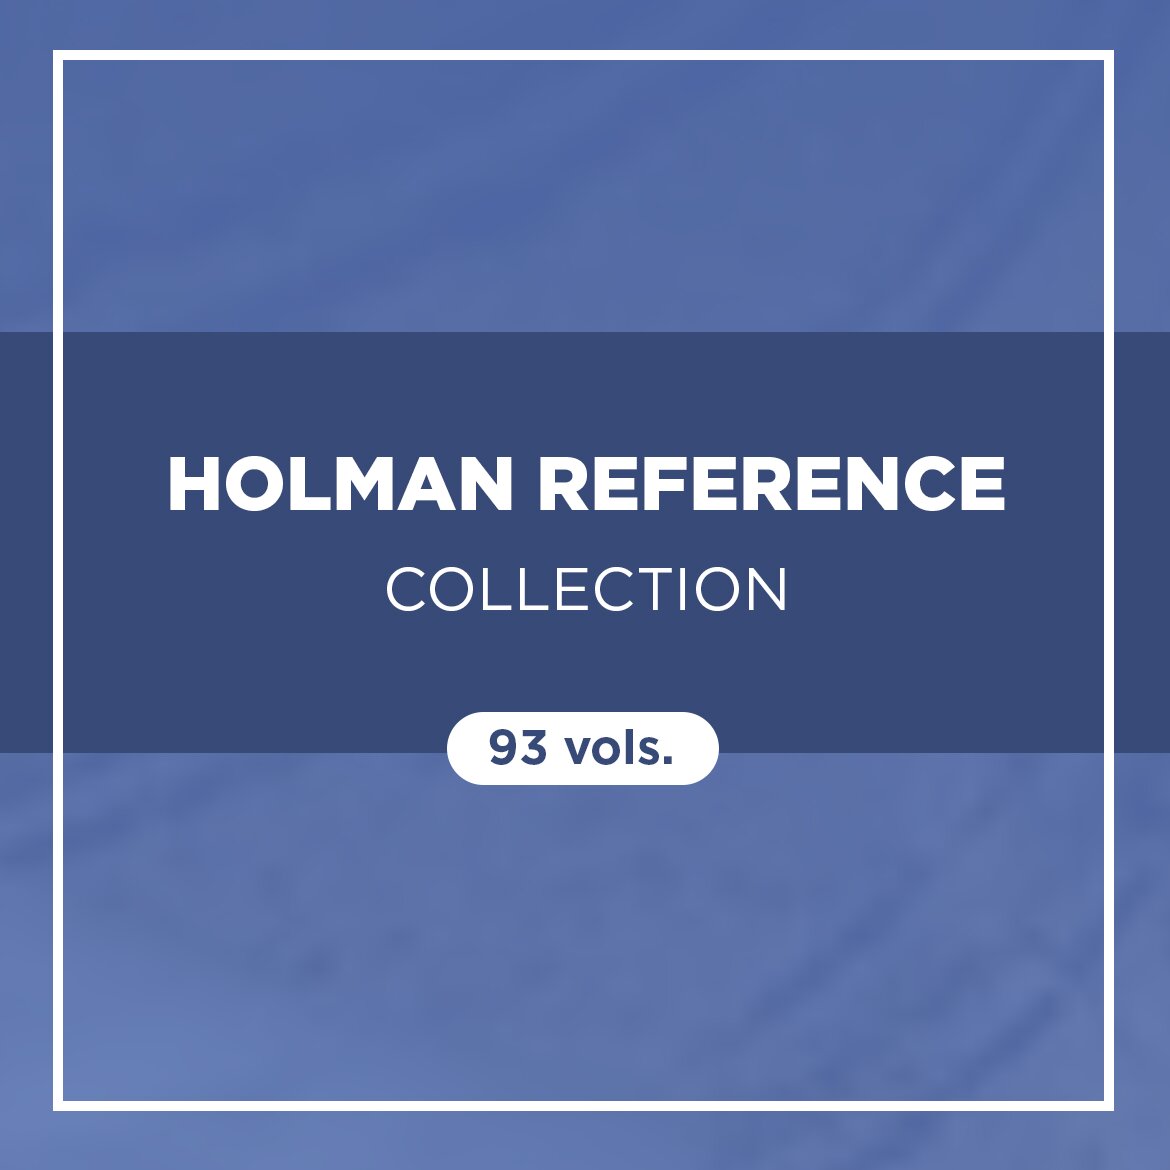 Holman Reference Collection (93 vols.)